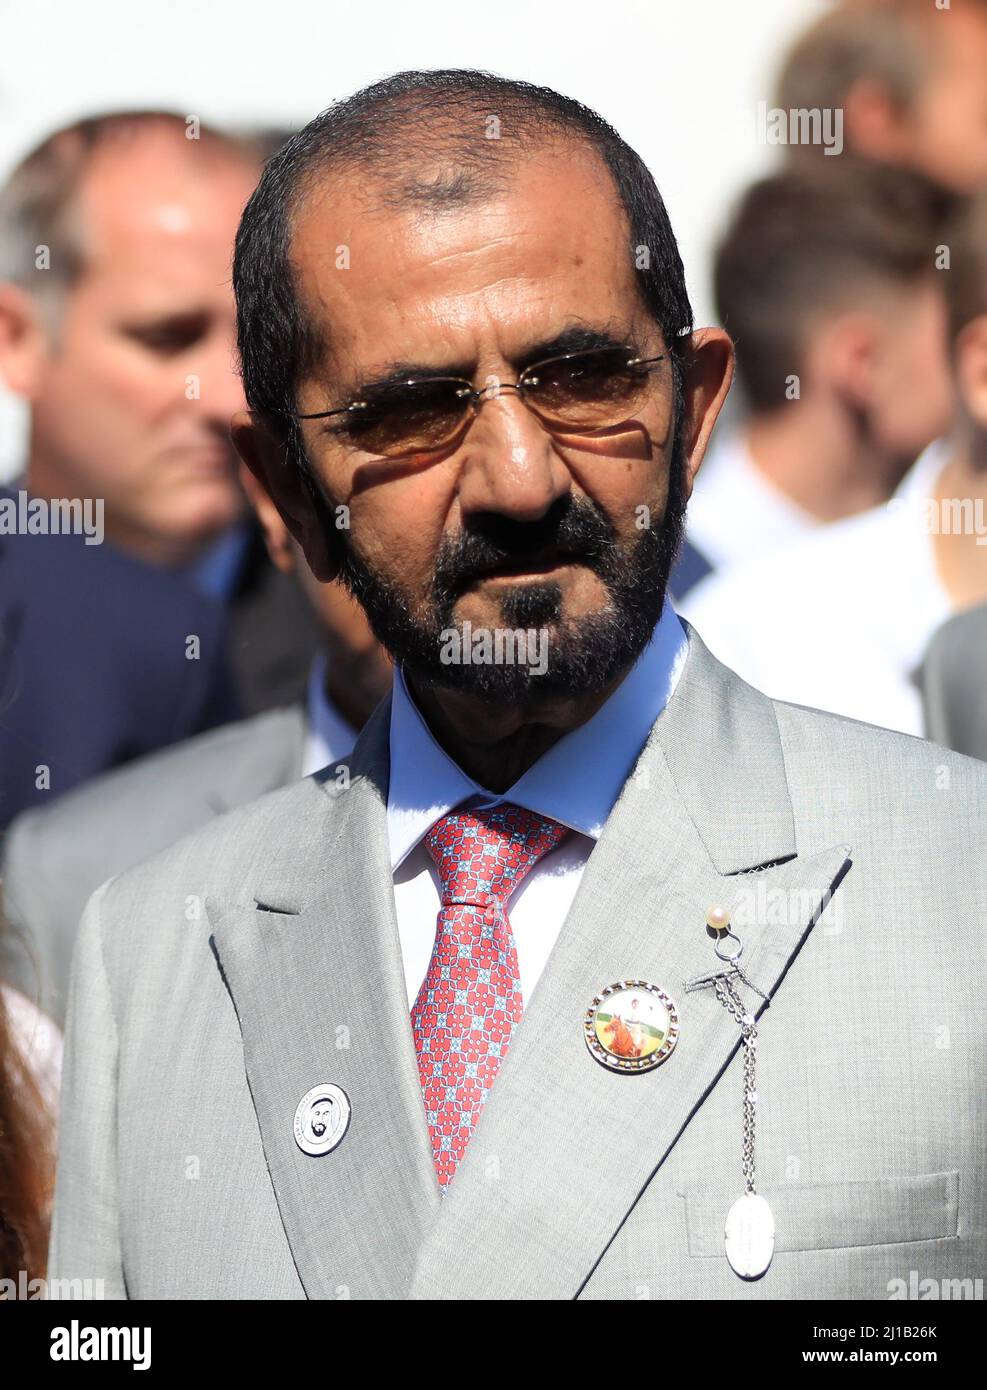 File photo dated 12/7/2018 of Sheikh Mohammed bin Rashid Al Maktoum after The Princess of Wales's Arqana Racing Club Stakes during day one of The Moet & Chandon July Festival at Newmarket Racecourse. The ruler of Dubai abused his former wife to an 'exorbitant degree', the High Court has found at the end of a lengthy legal battle over their two children. The 72 year old 'consistently displayed coercive and controlling behaviour with respect to those members of his family who he regards as behaving contrary to his will,' senior judge Sir Andrew McFarlane said in a judgment published on Thursday. Stock Photo